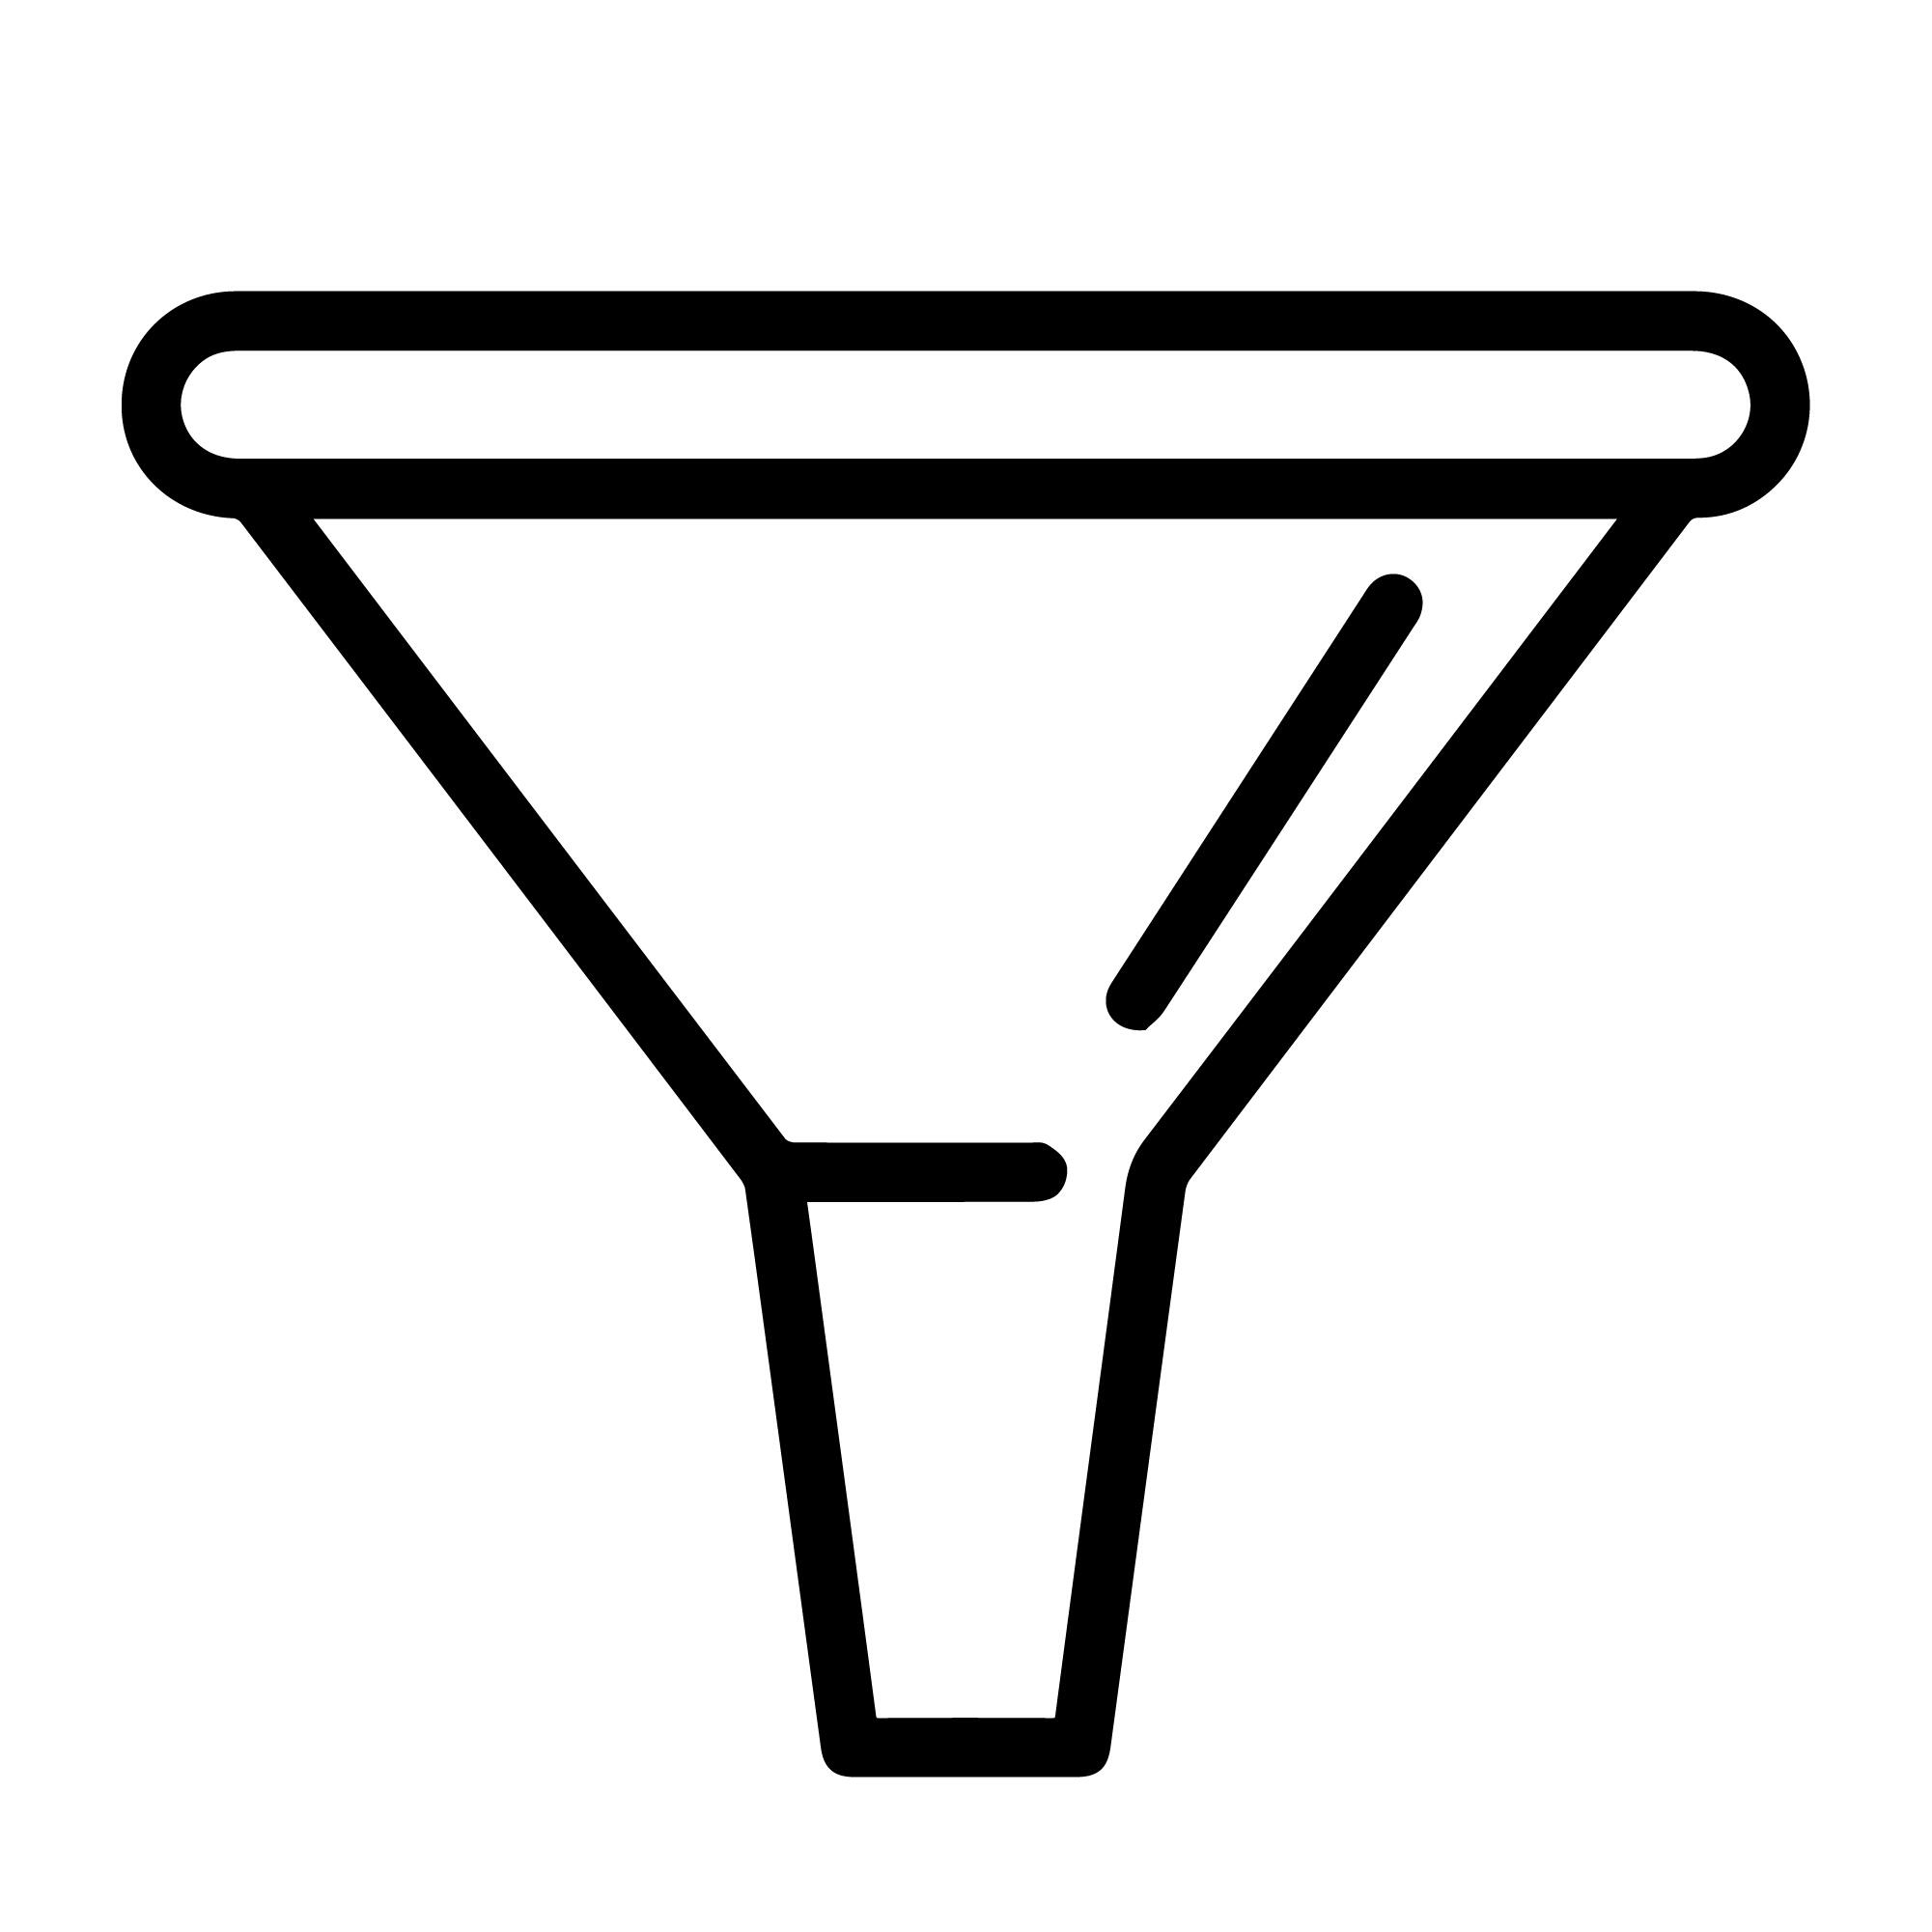 Image of funnel icon.